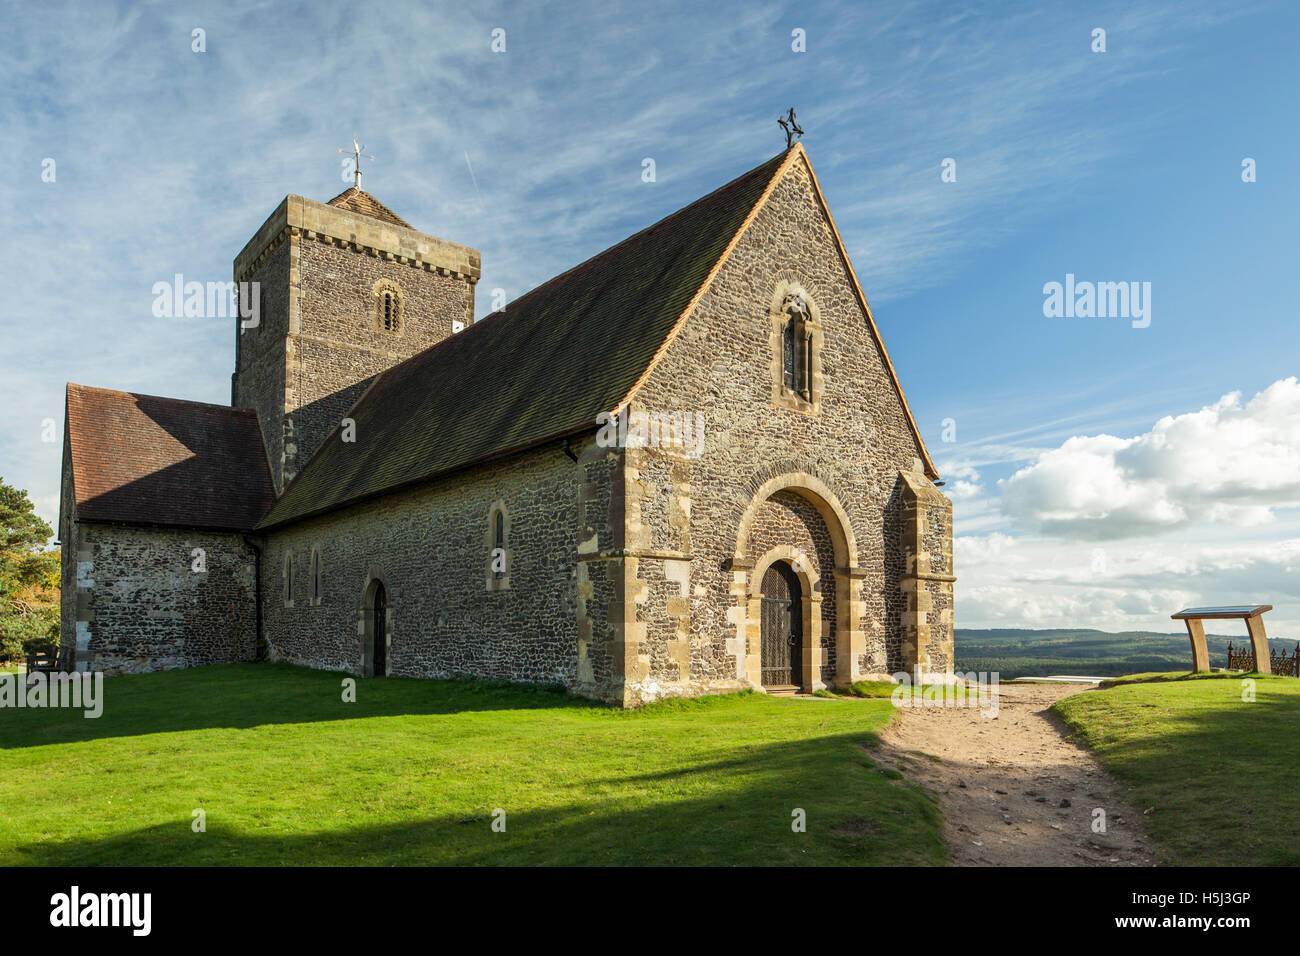 Autumn afternoon at the iconic church of St Martha-on-the-Hill near Chilworth, Surrey, England. Stock Photo